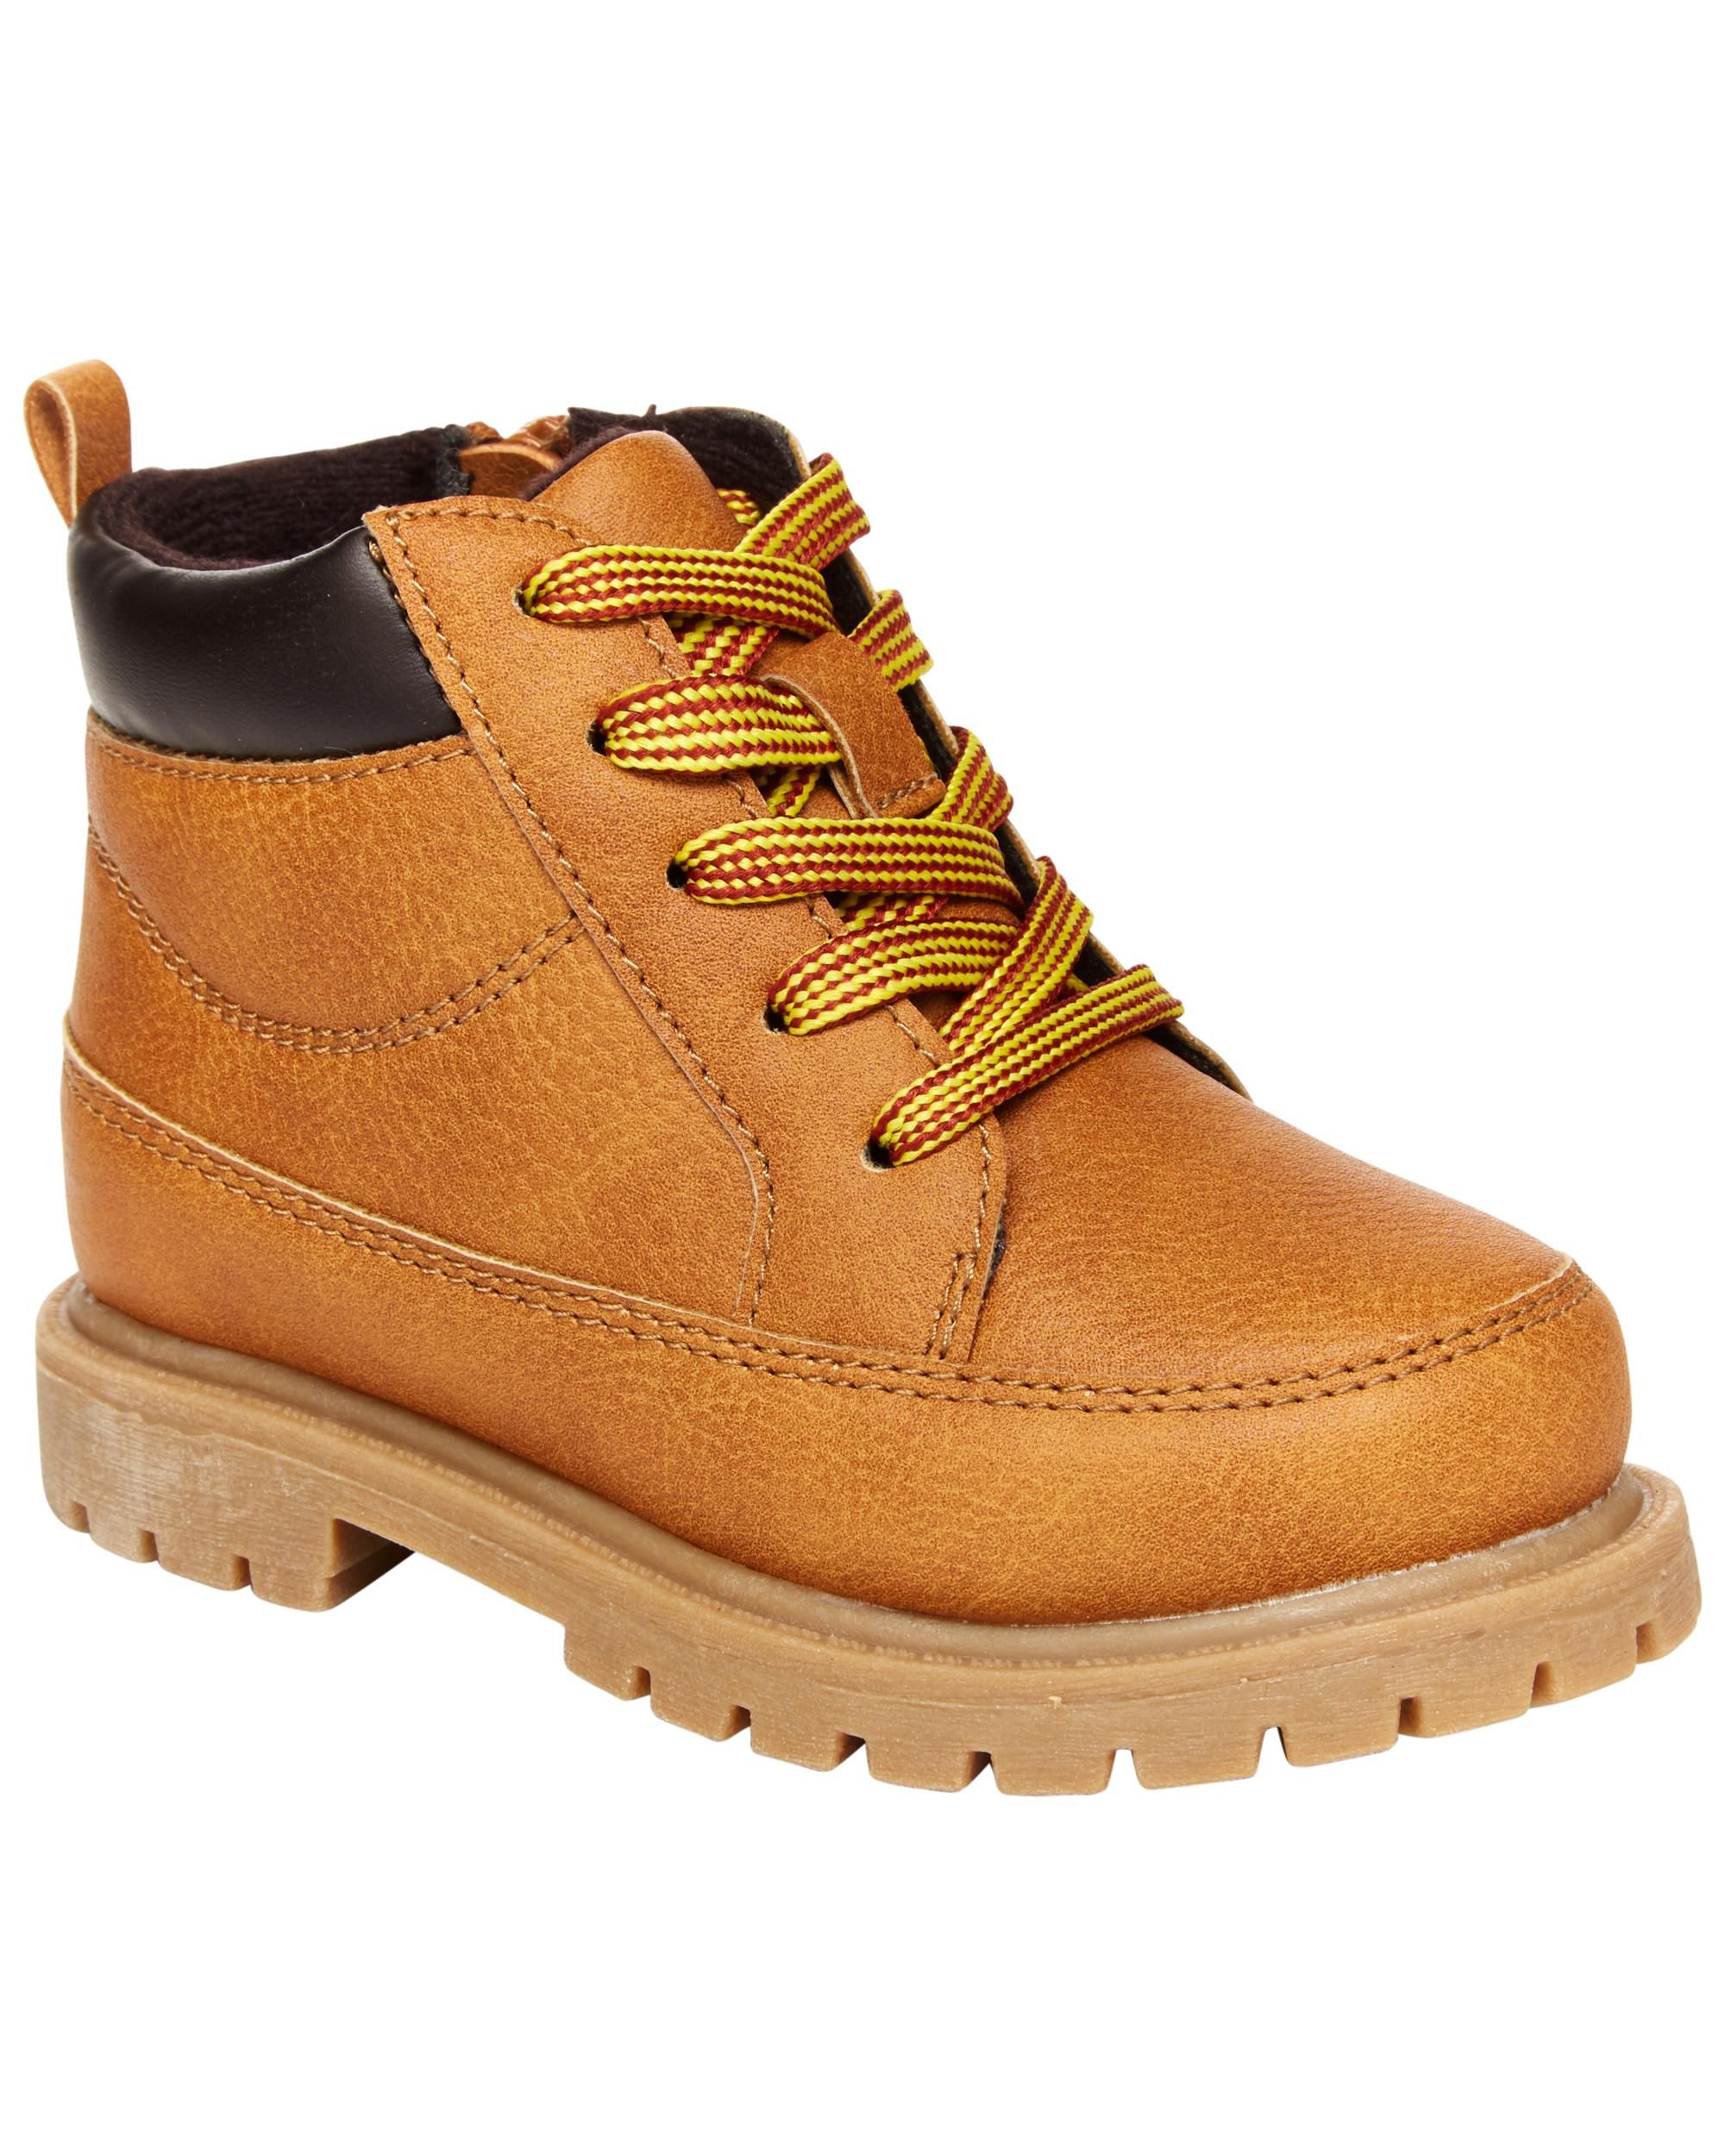 Kid Hiking Boots | Carter's